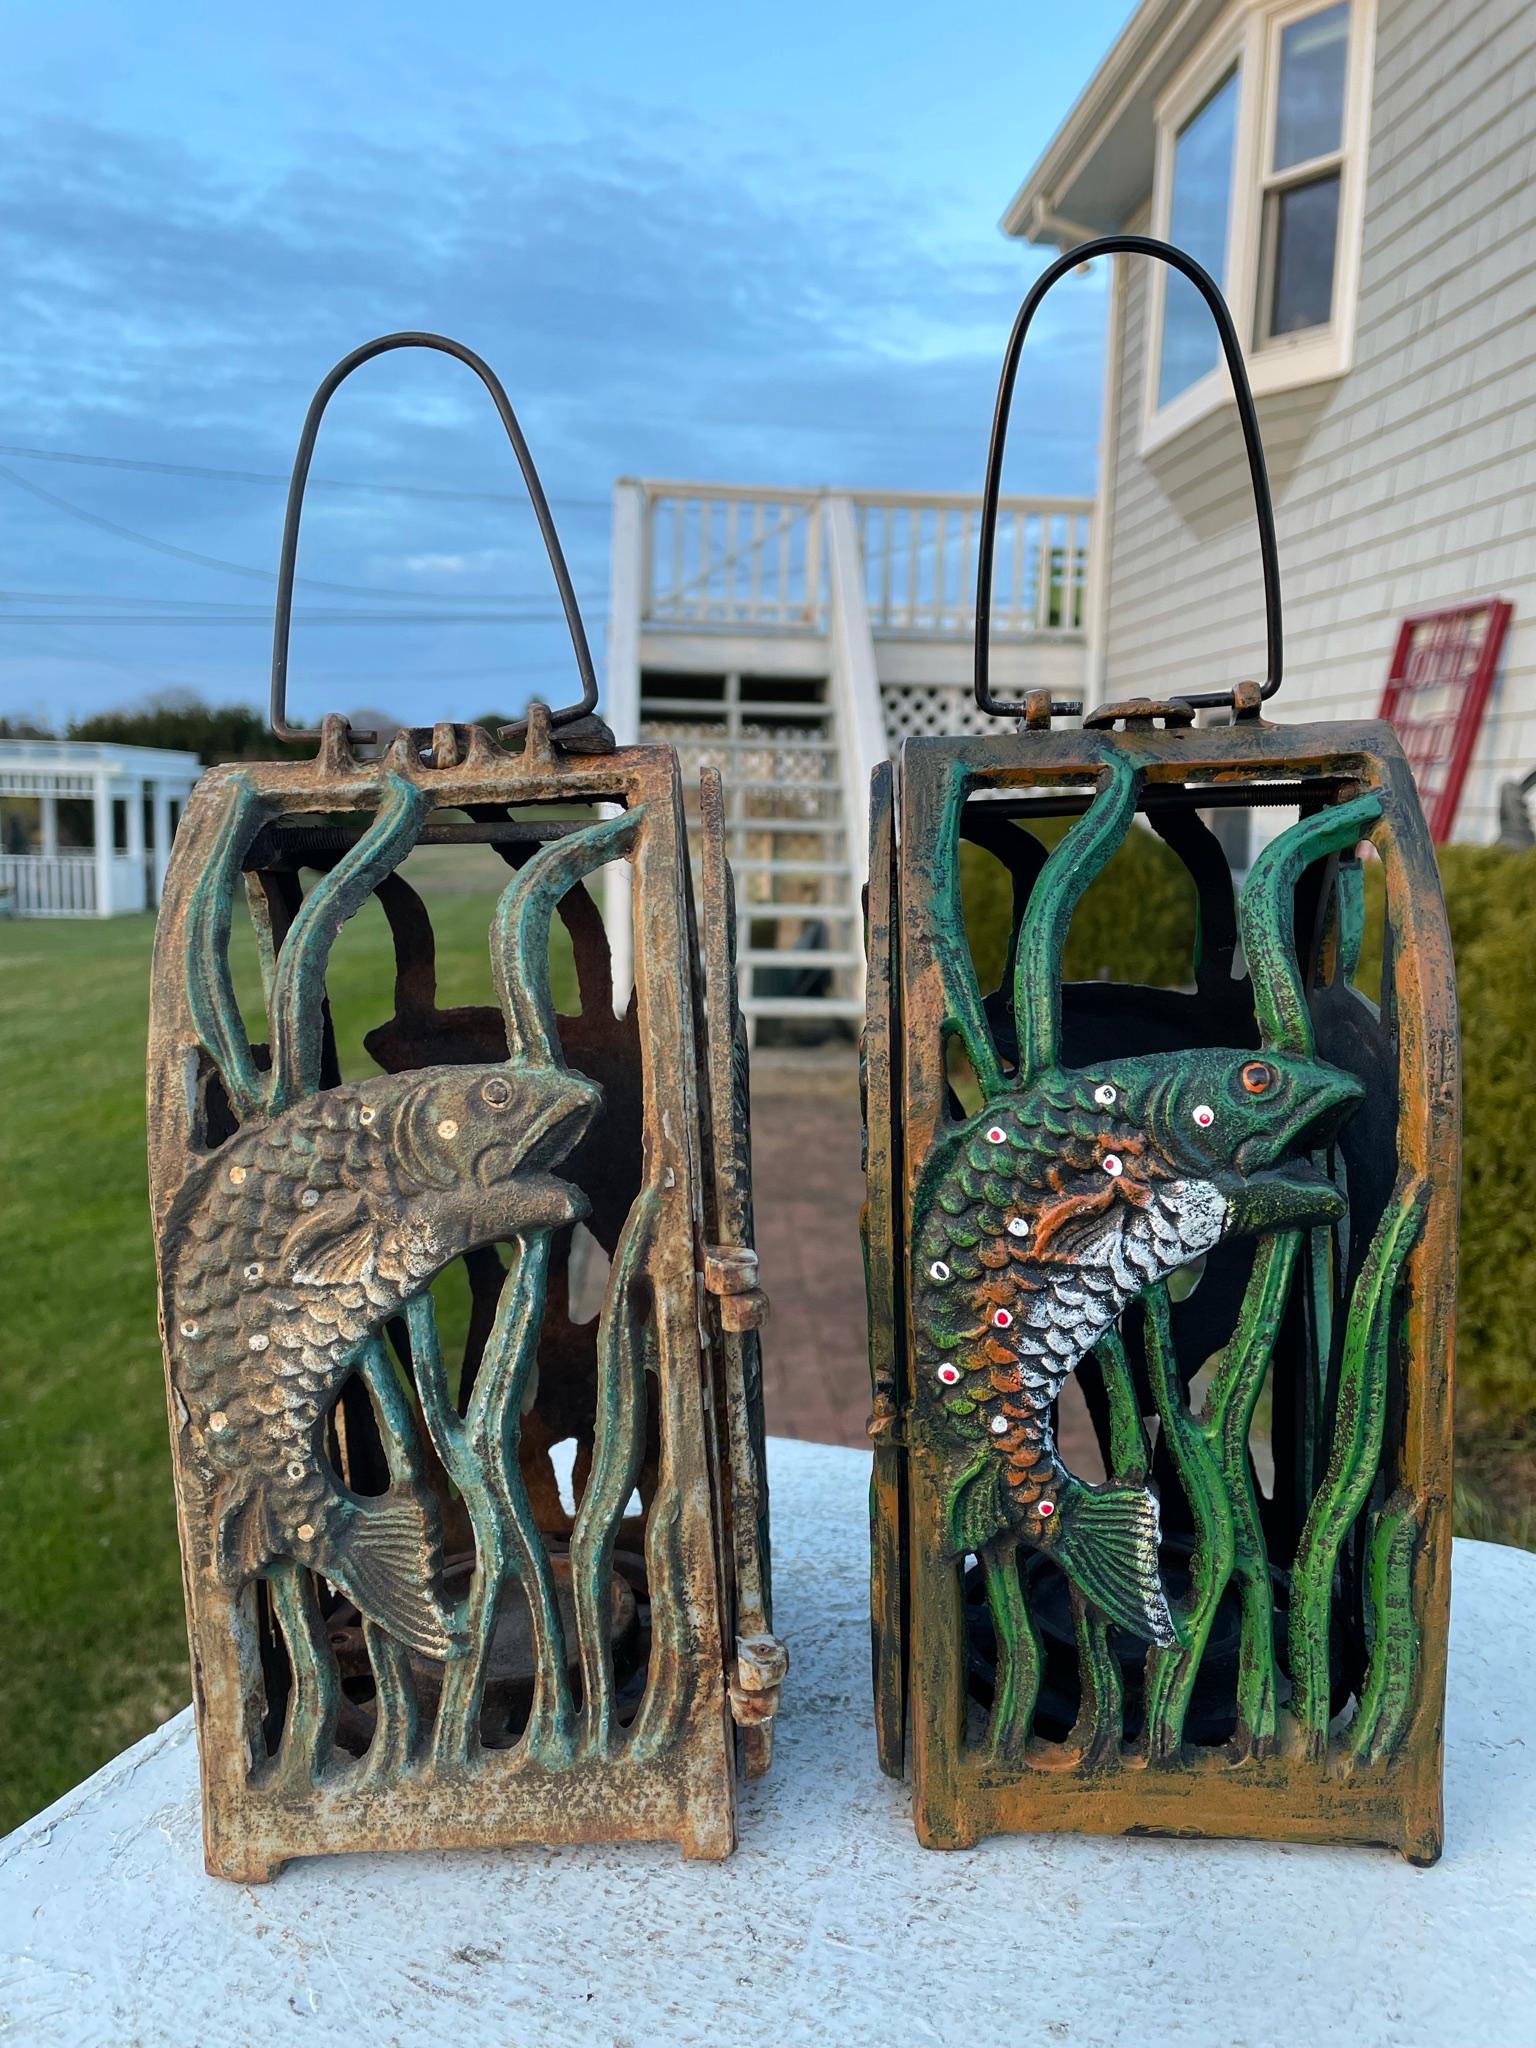 Fishing friends delight

This unusual pair (2) of Jumping Trout or Bass fish themed hand painted iron garden lanterns is the first pair of this design we have seen. 

Sturdily crafted, they boast jumping fish on all four sides and were well